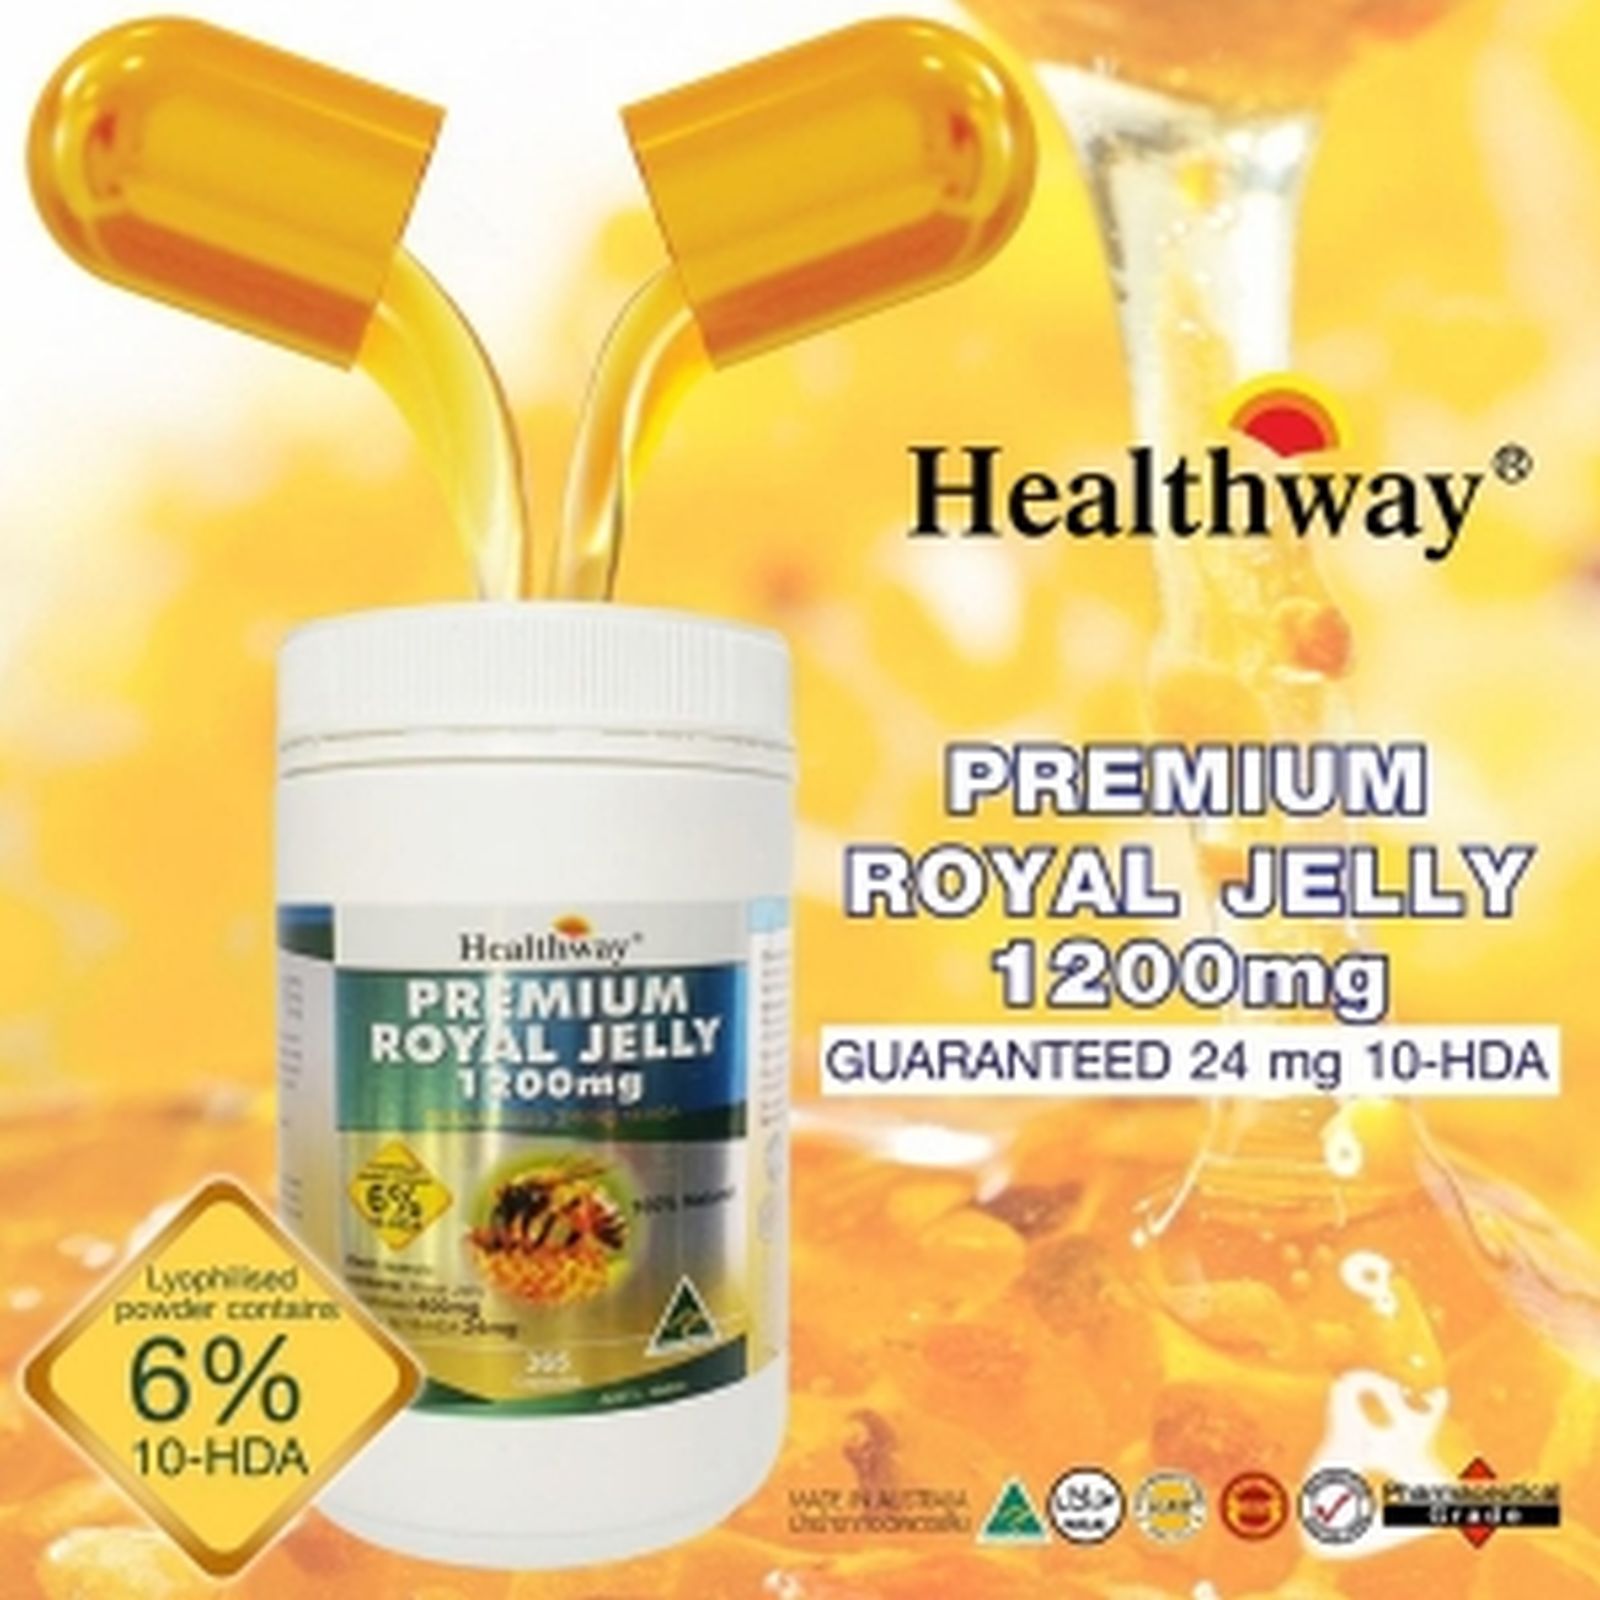 Healthway Premium Royal Jelly 1200mg Supplements Fantastic Product 365 Tablets 675983236922 Ebay